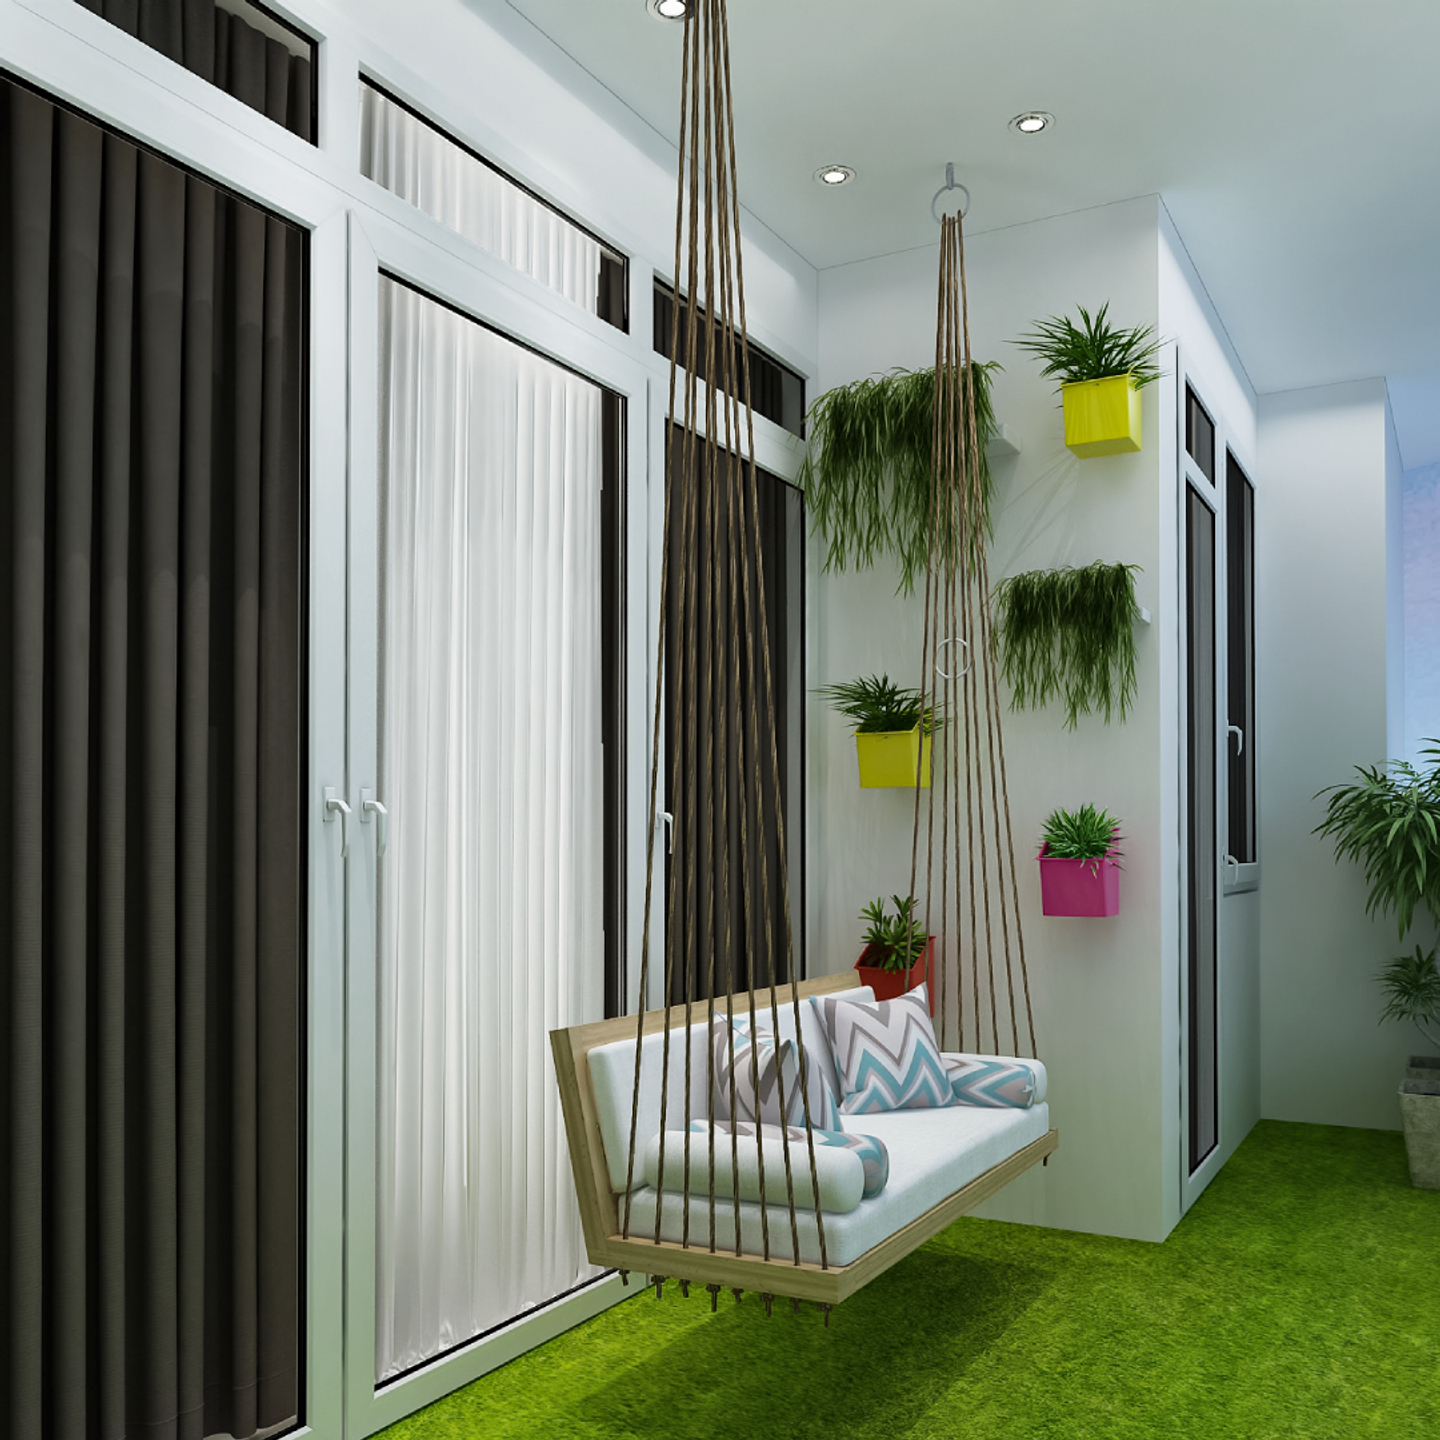 Balcony Design With A Hanging Swing And Grass Flooring - Livspace